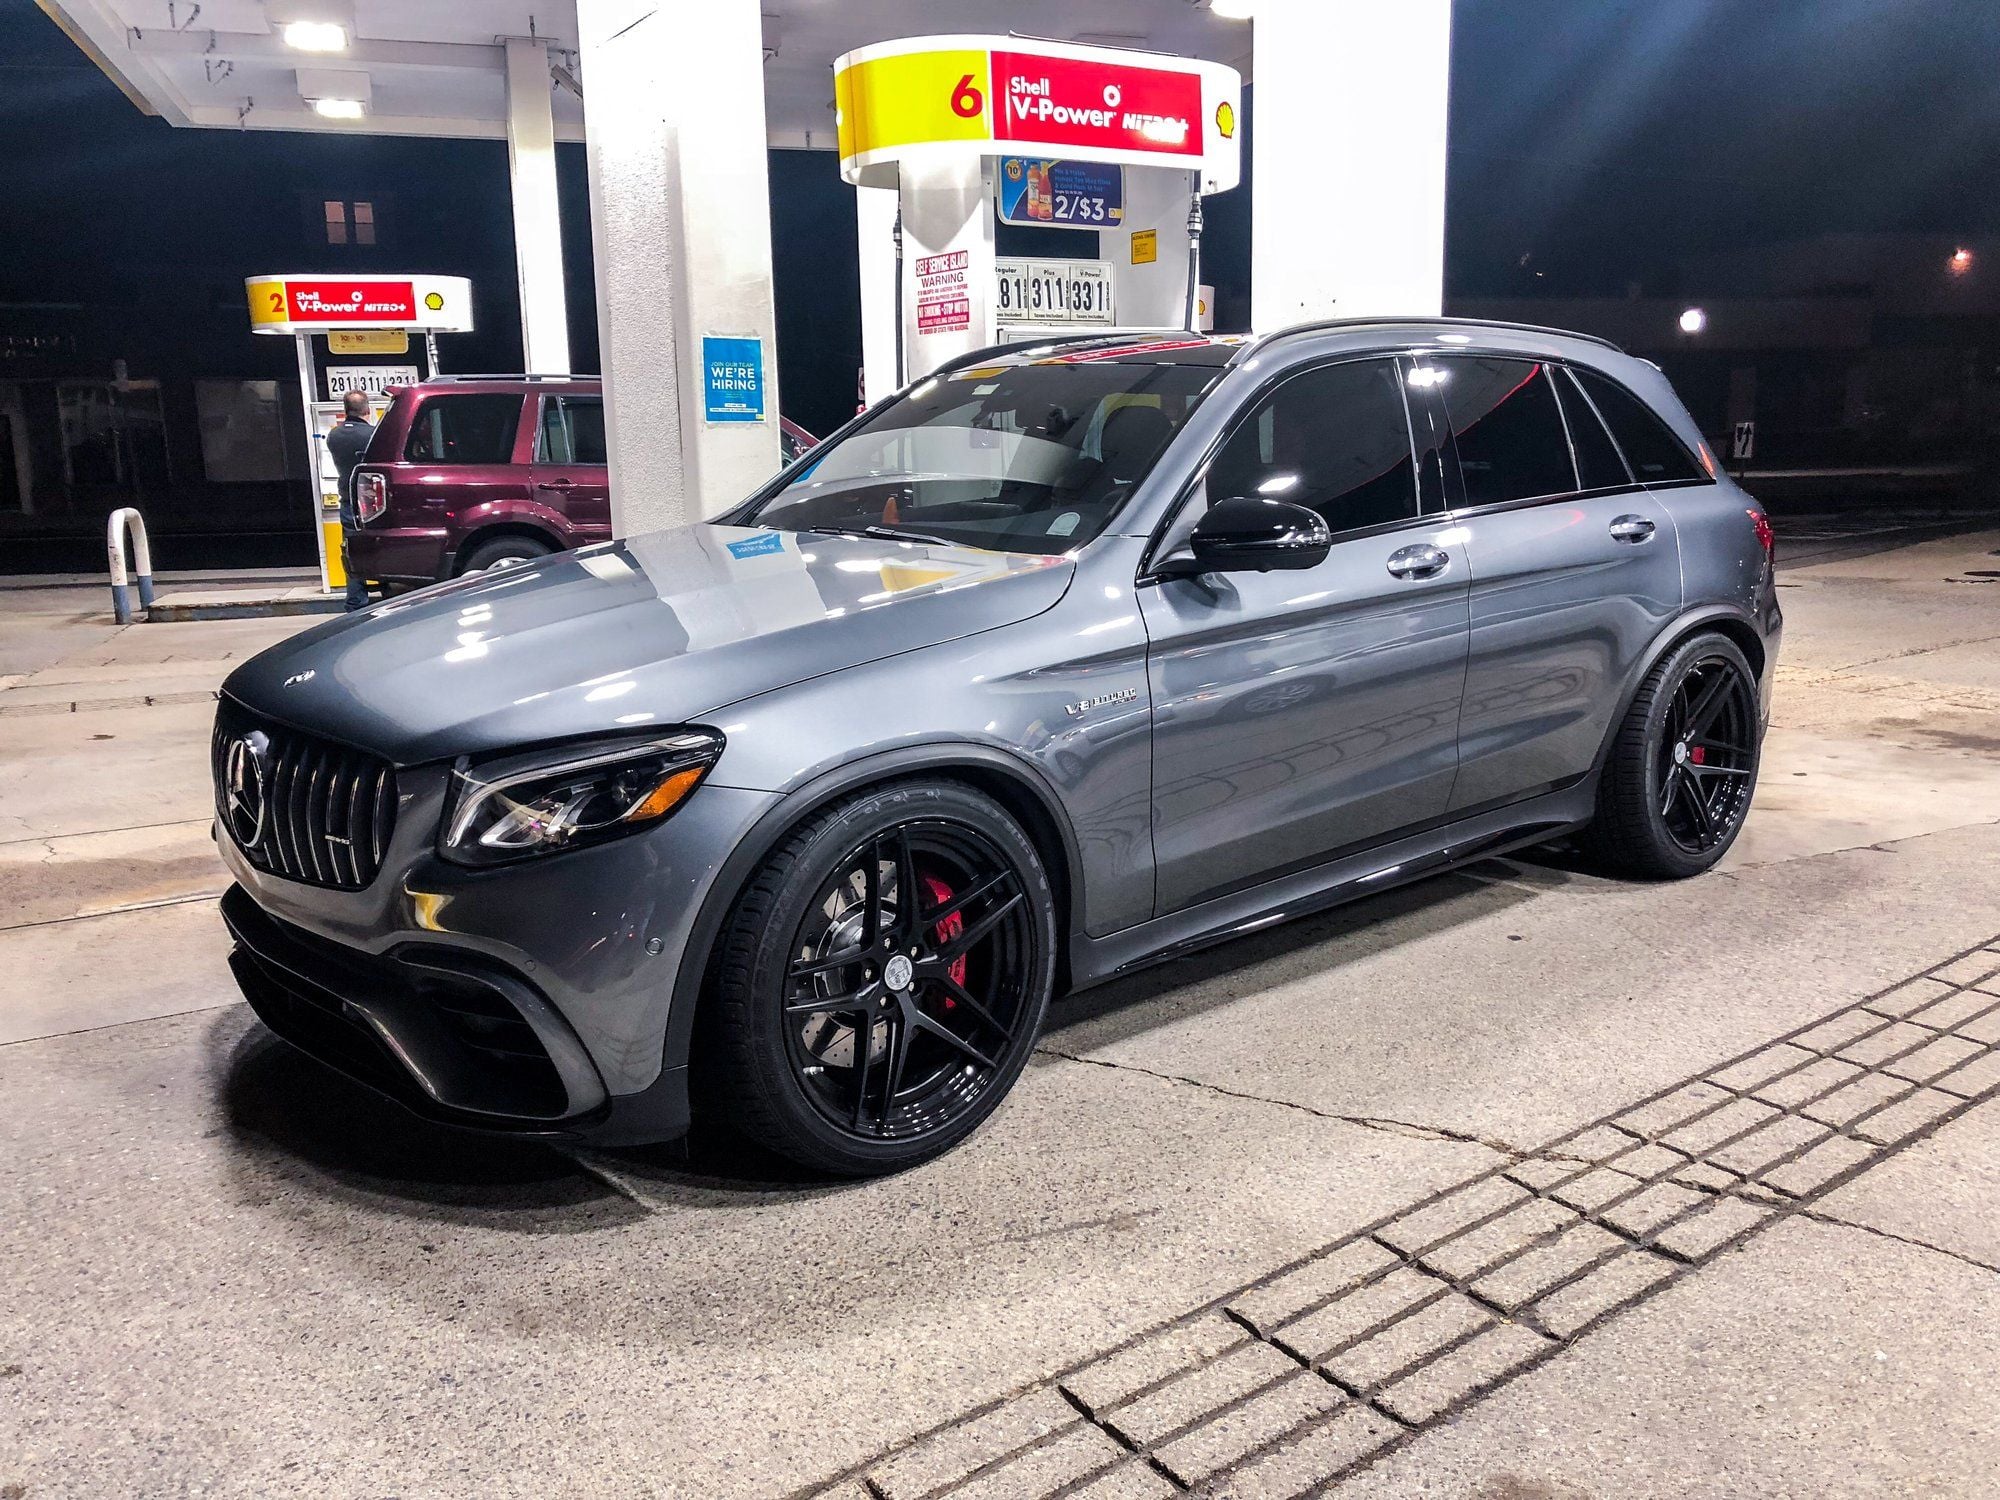 Wheels and Tires/Axles - FS: Signature Forged 2-Piece Wheels + Tires + TPMS - Used - 2018 to 2019 Mercedes-Benz GLC63 AMG - 2018 to 2019 Mercedes-Benz GLC63 AMG S - Weston, MA 02493, United States